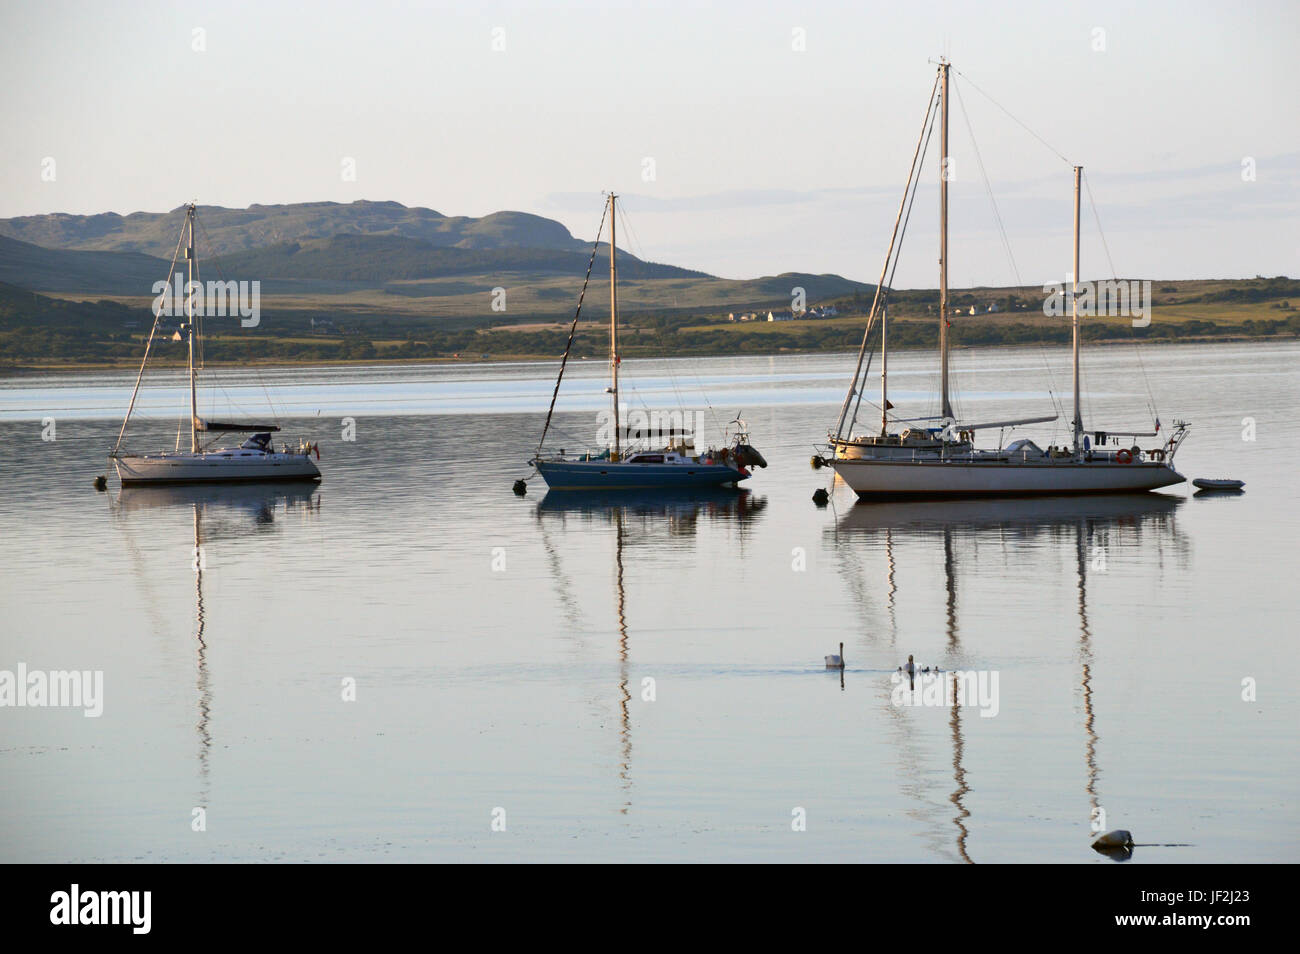 Four Sailing Boats Moored in Craighouse, Small Isles Bay  on the Isle of Jura in the Scottish Islands, Scotland UK. Stock Photo